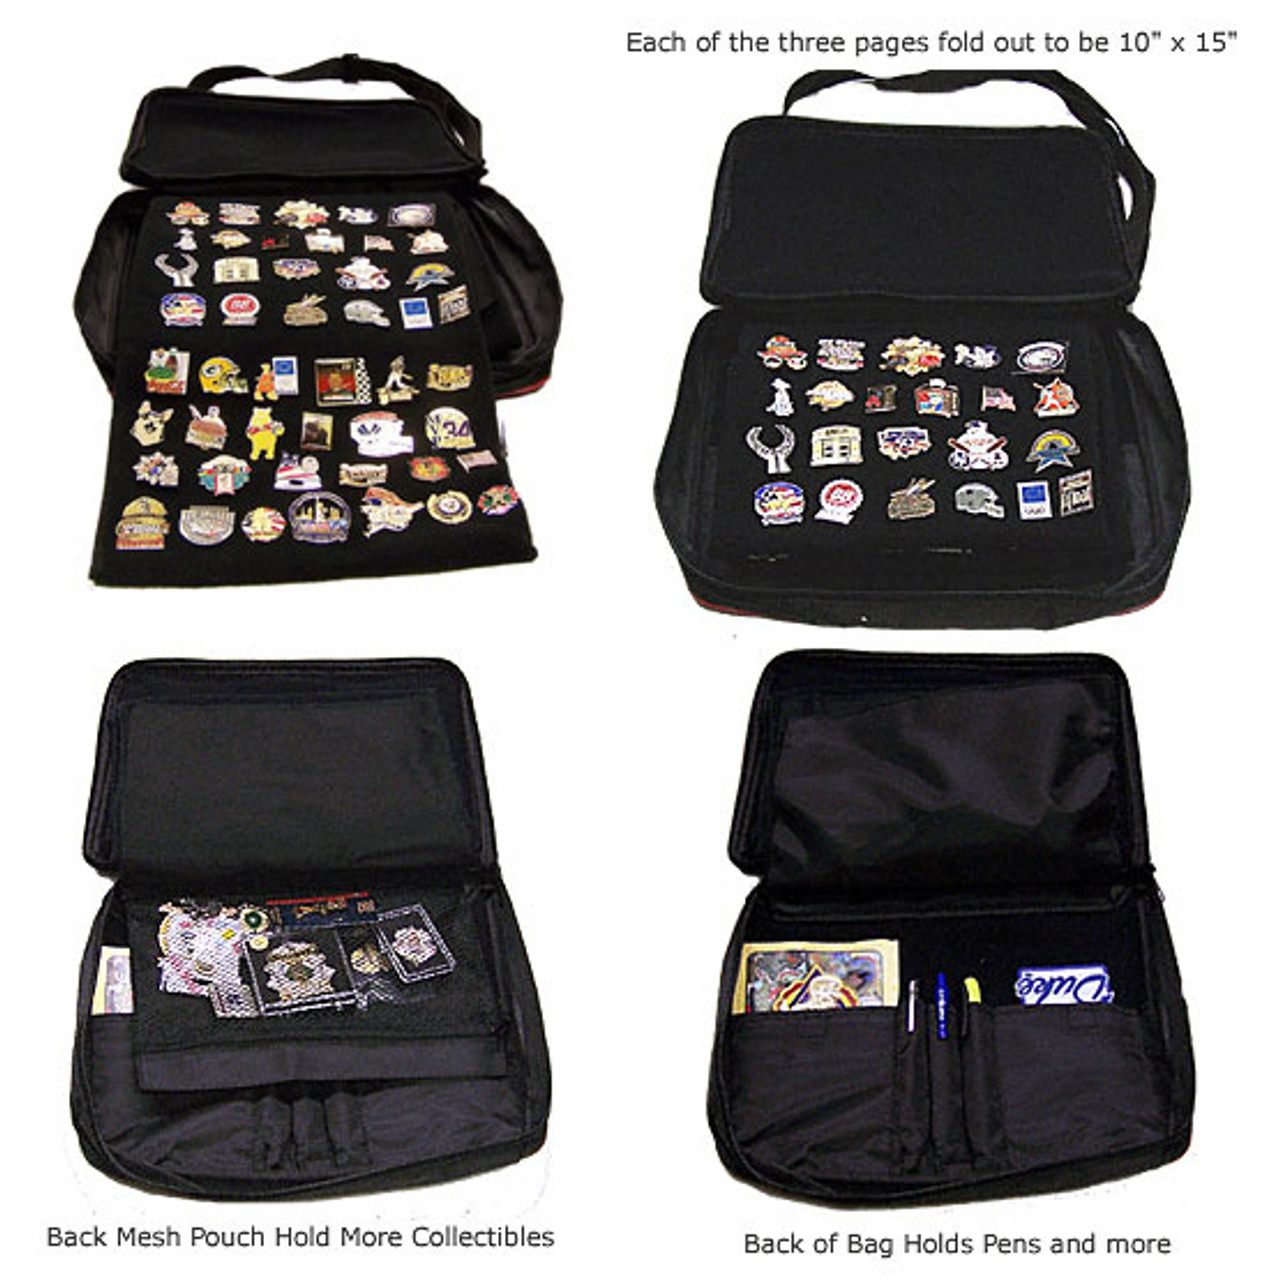 Pin on bags bags and more bags